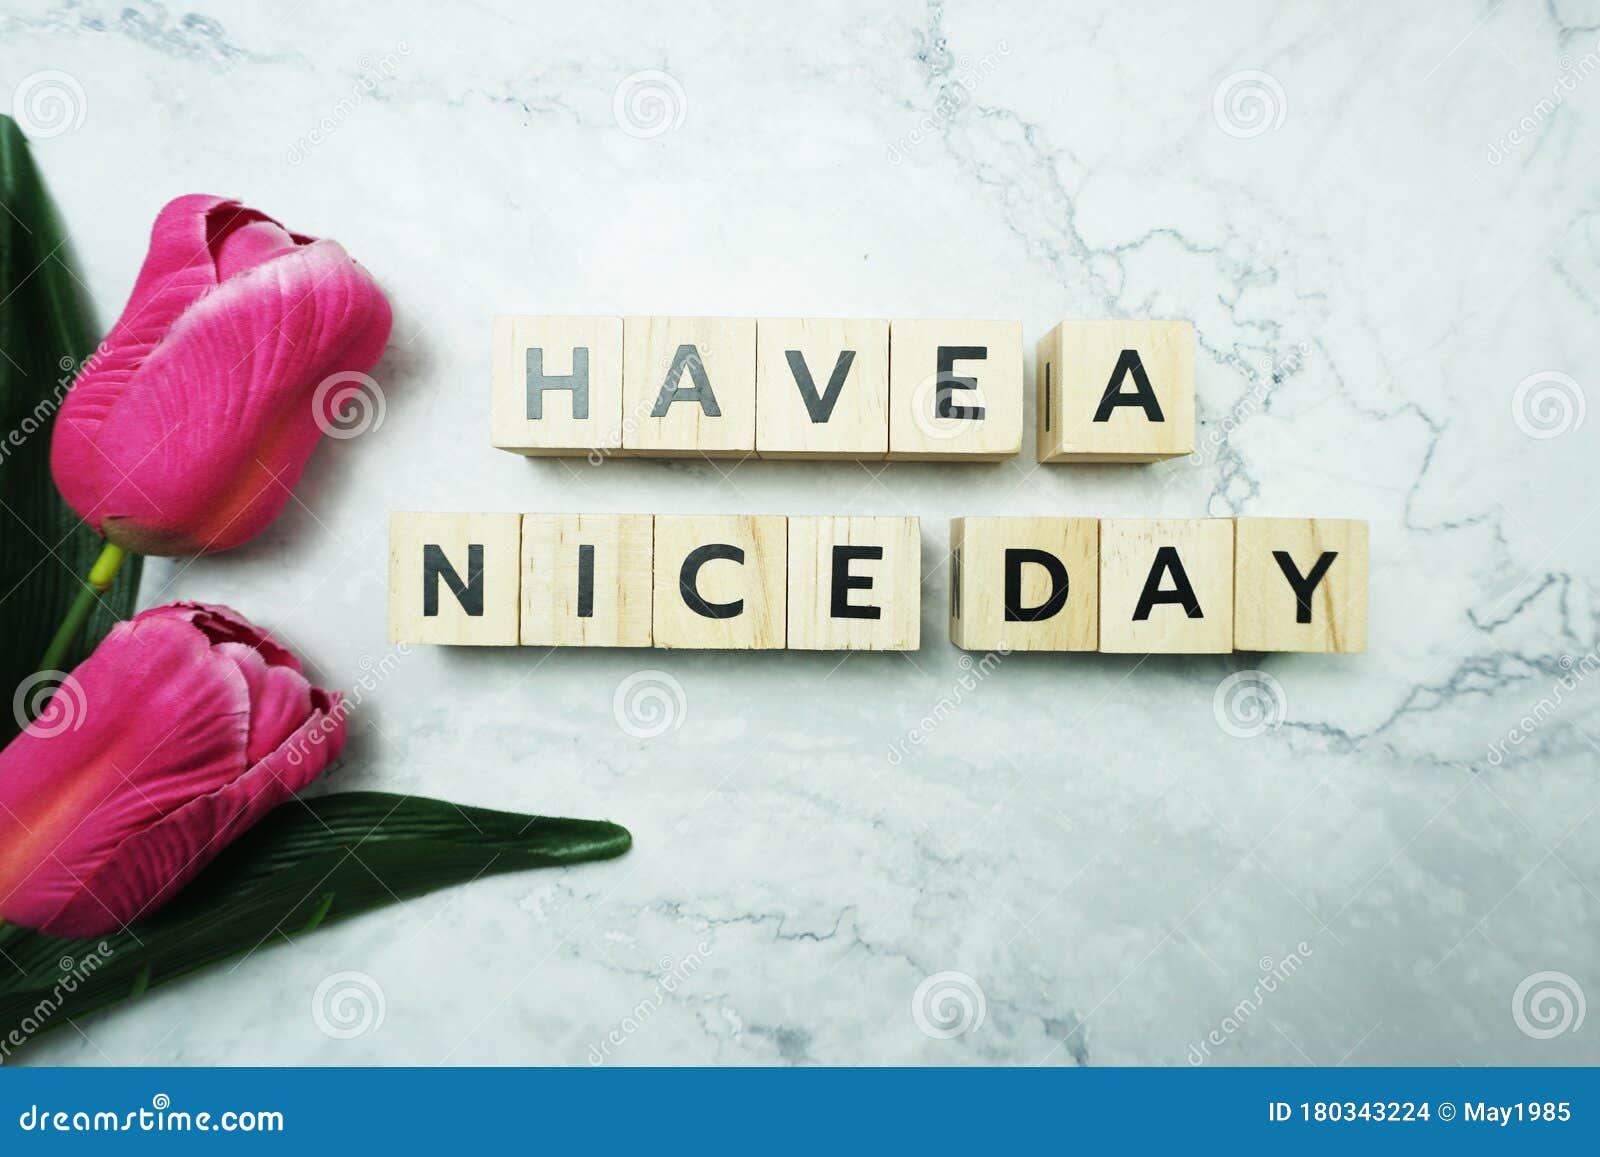 Have a Nice Day Word Letter Message on Marble Background Stock ...